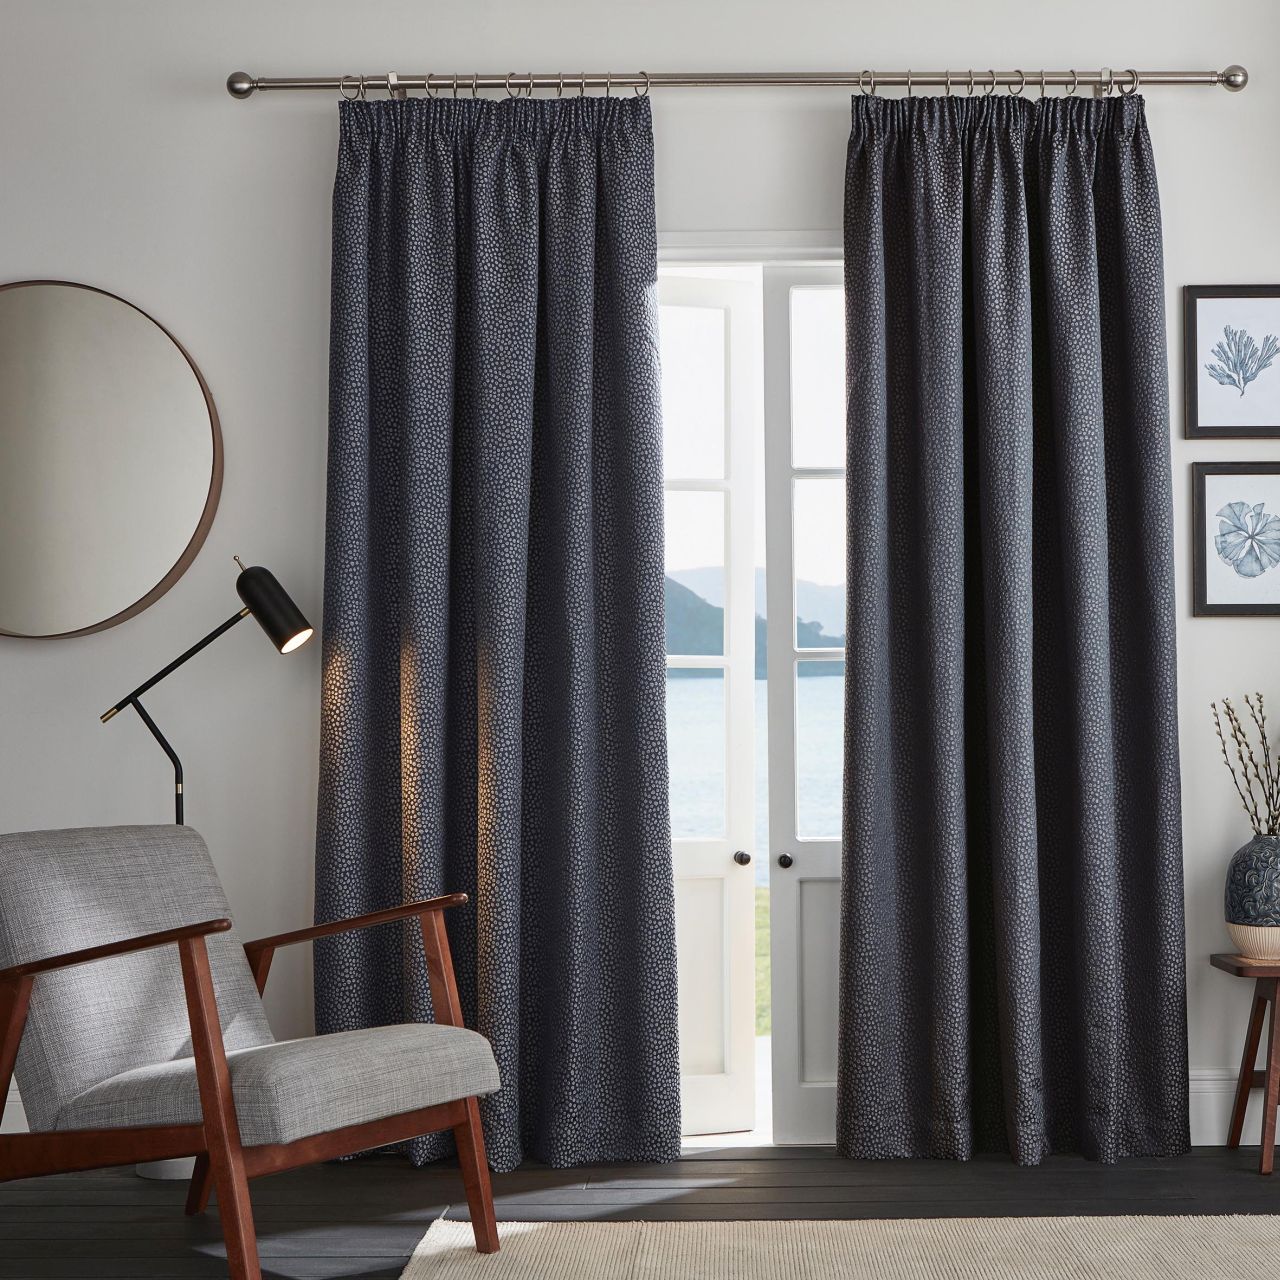 Ardely Indigo Ready Made Blackout Pencil Pleat Curtains